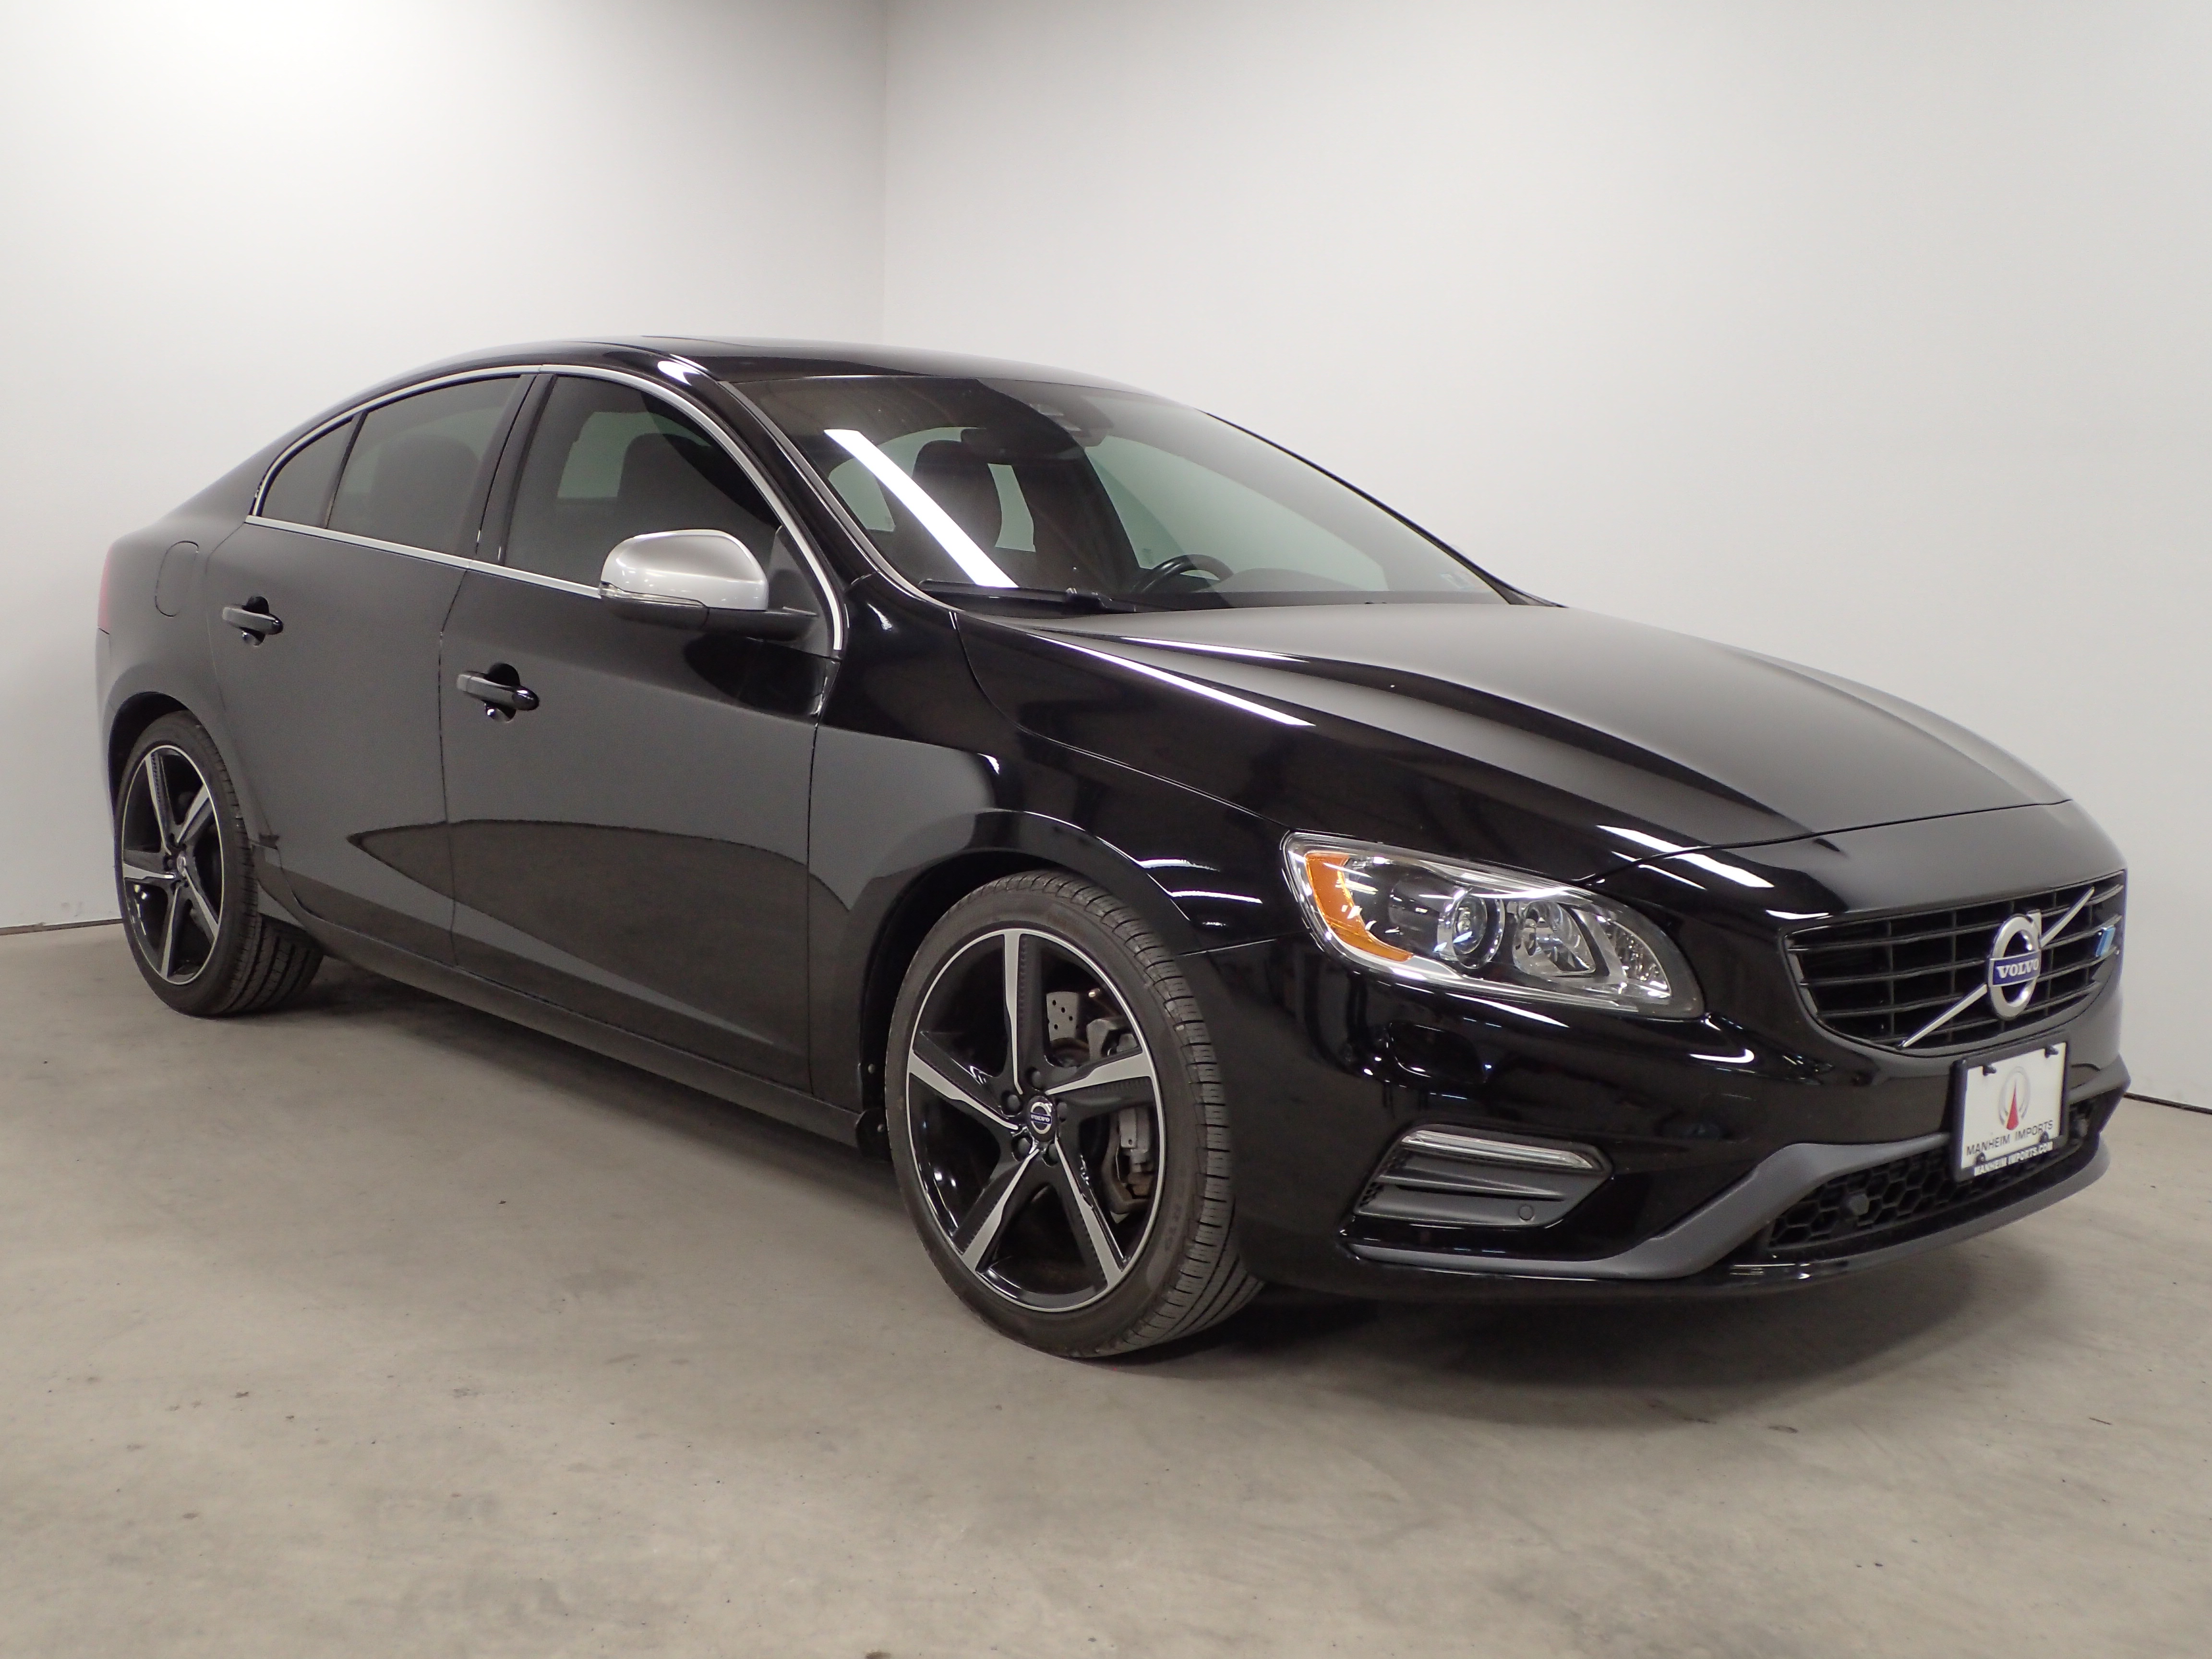 2012 Volvo S60 T6 R Design Performance Parts - Volvo S60 Review